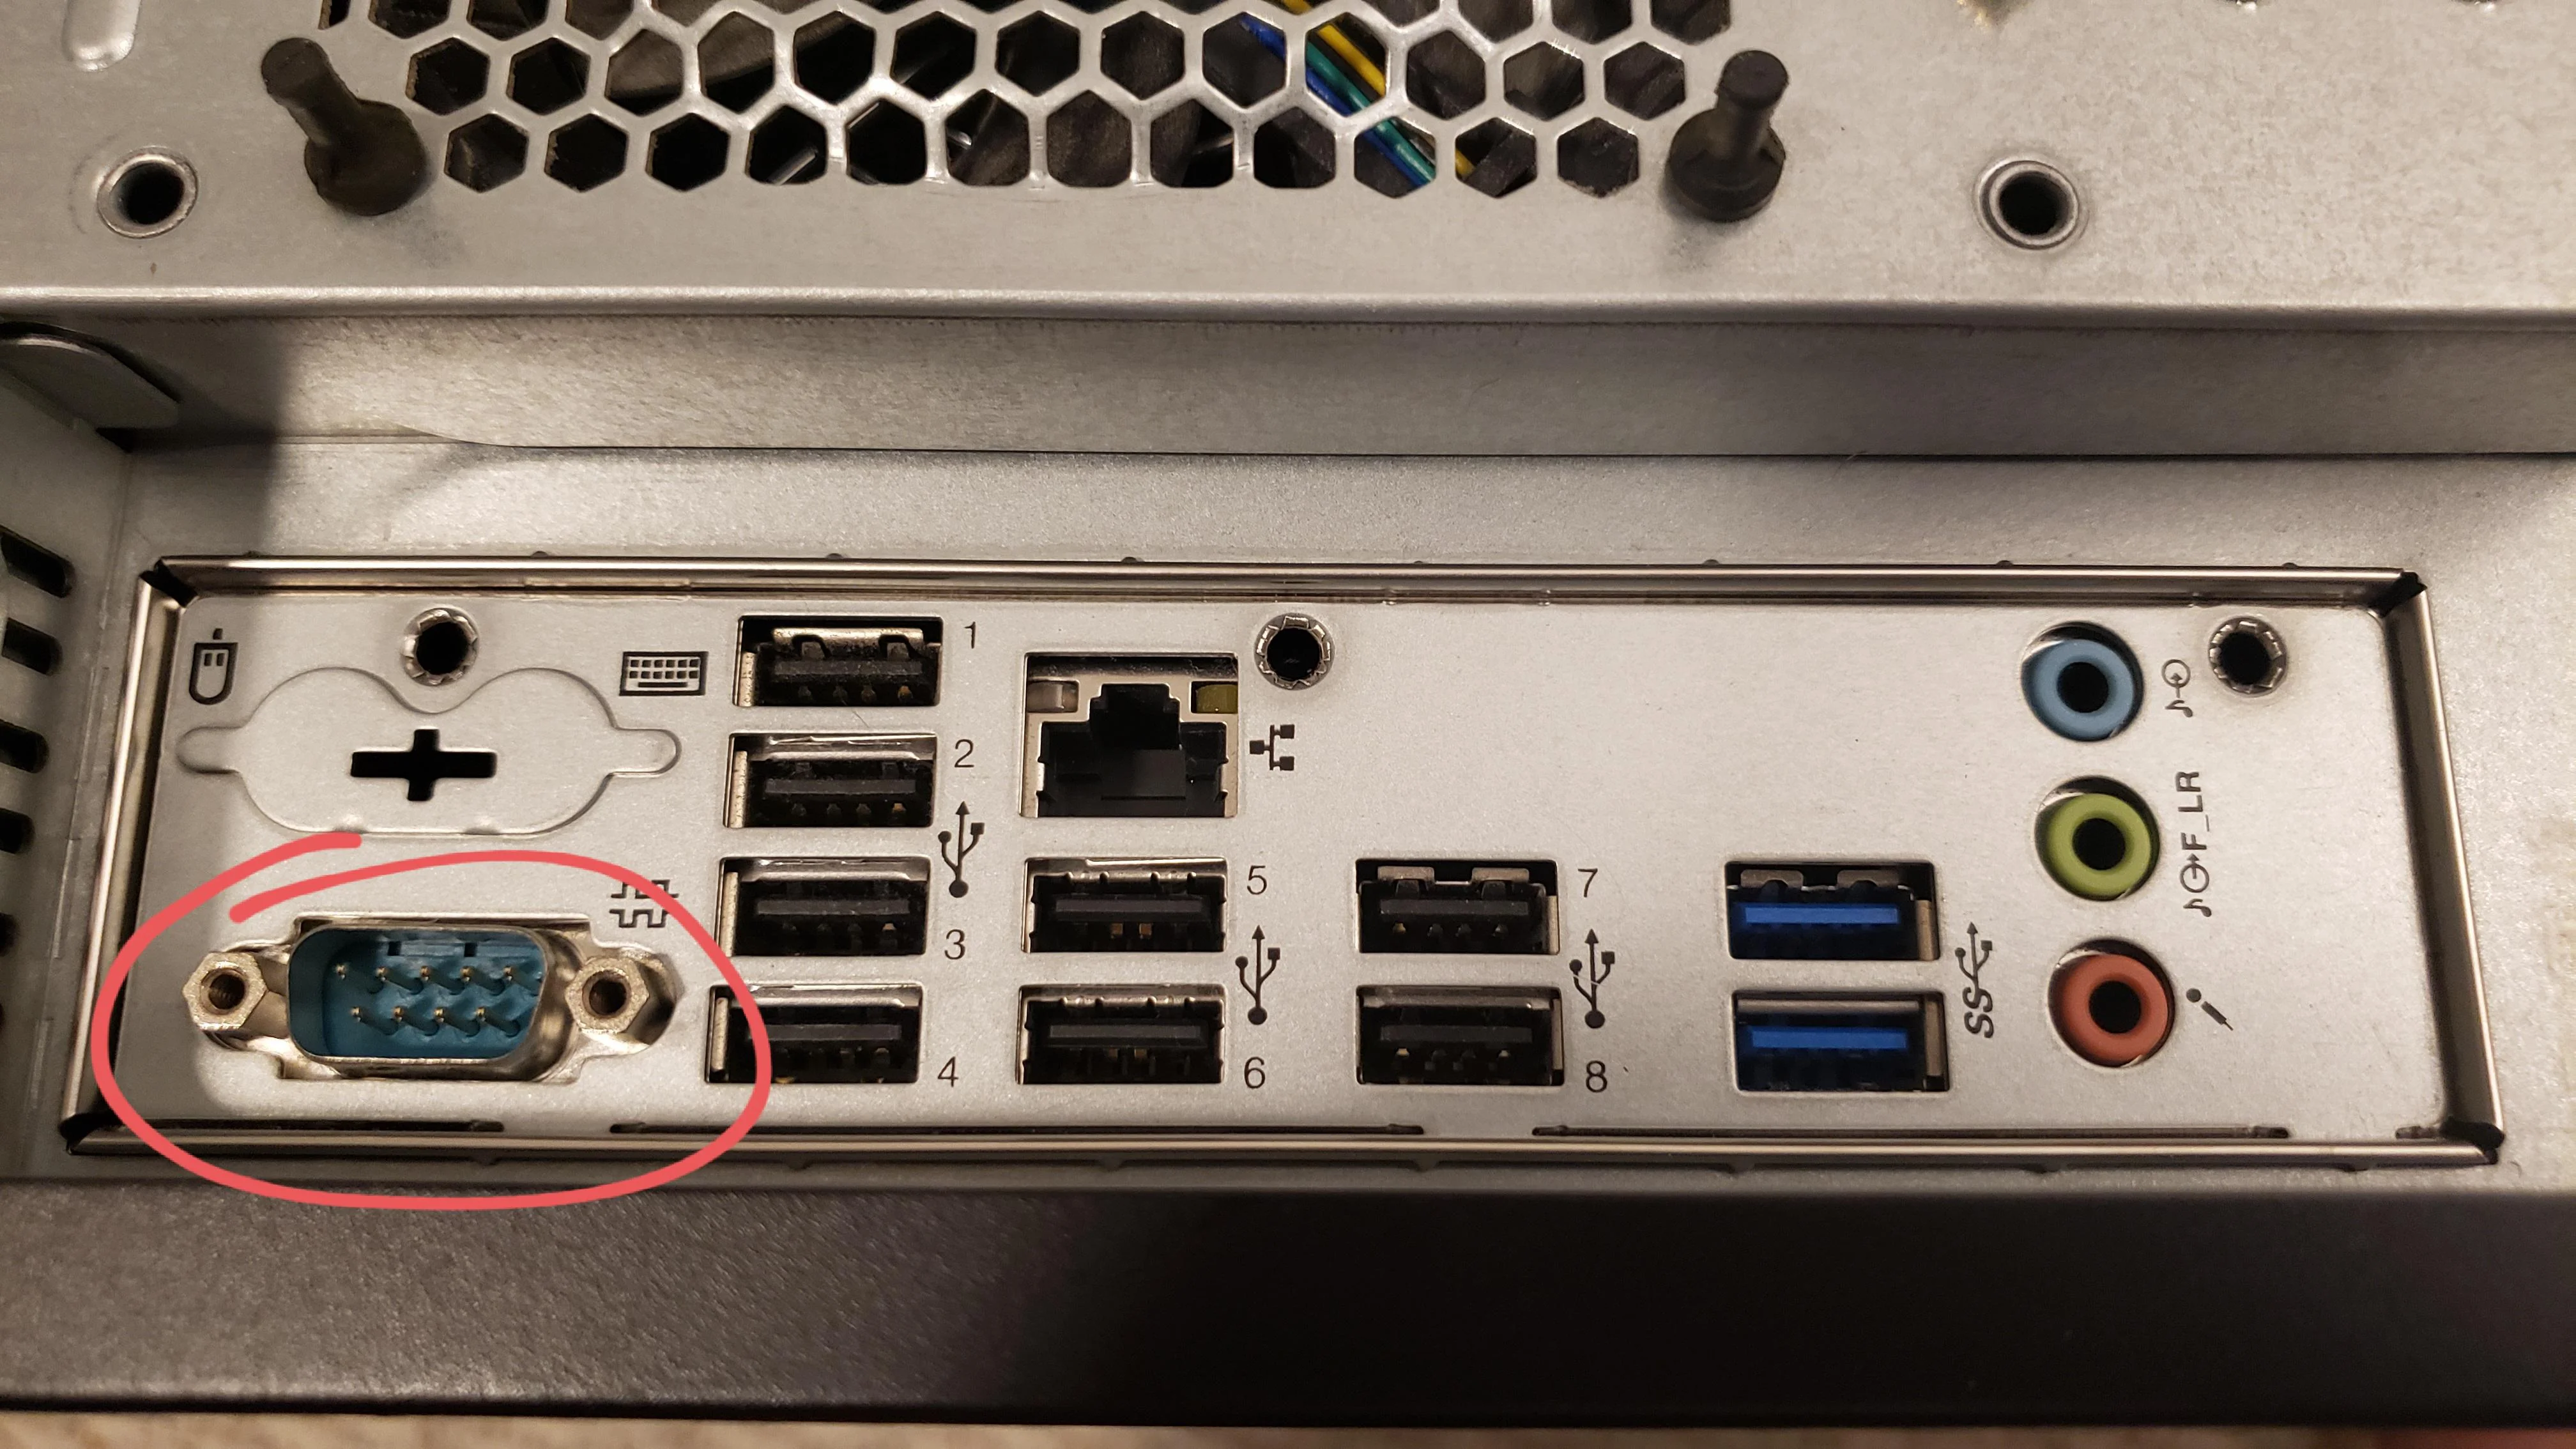 which-device-would-most-likely-use-a-db9-connector